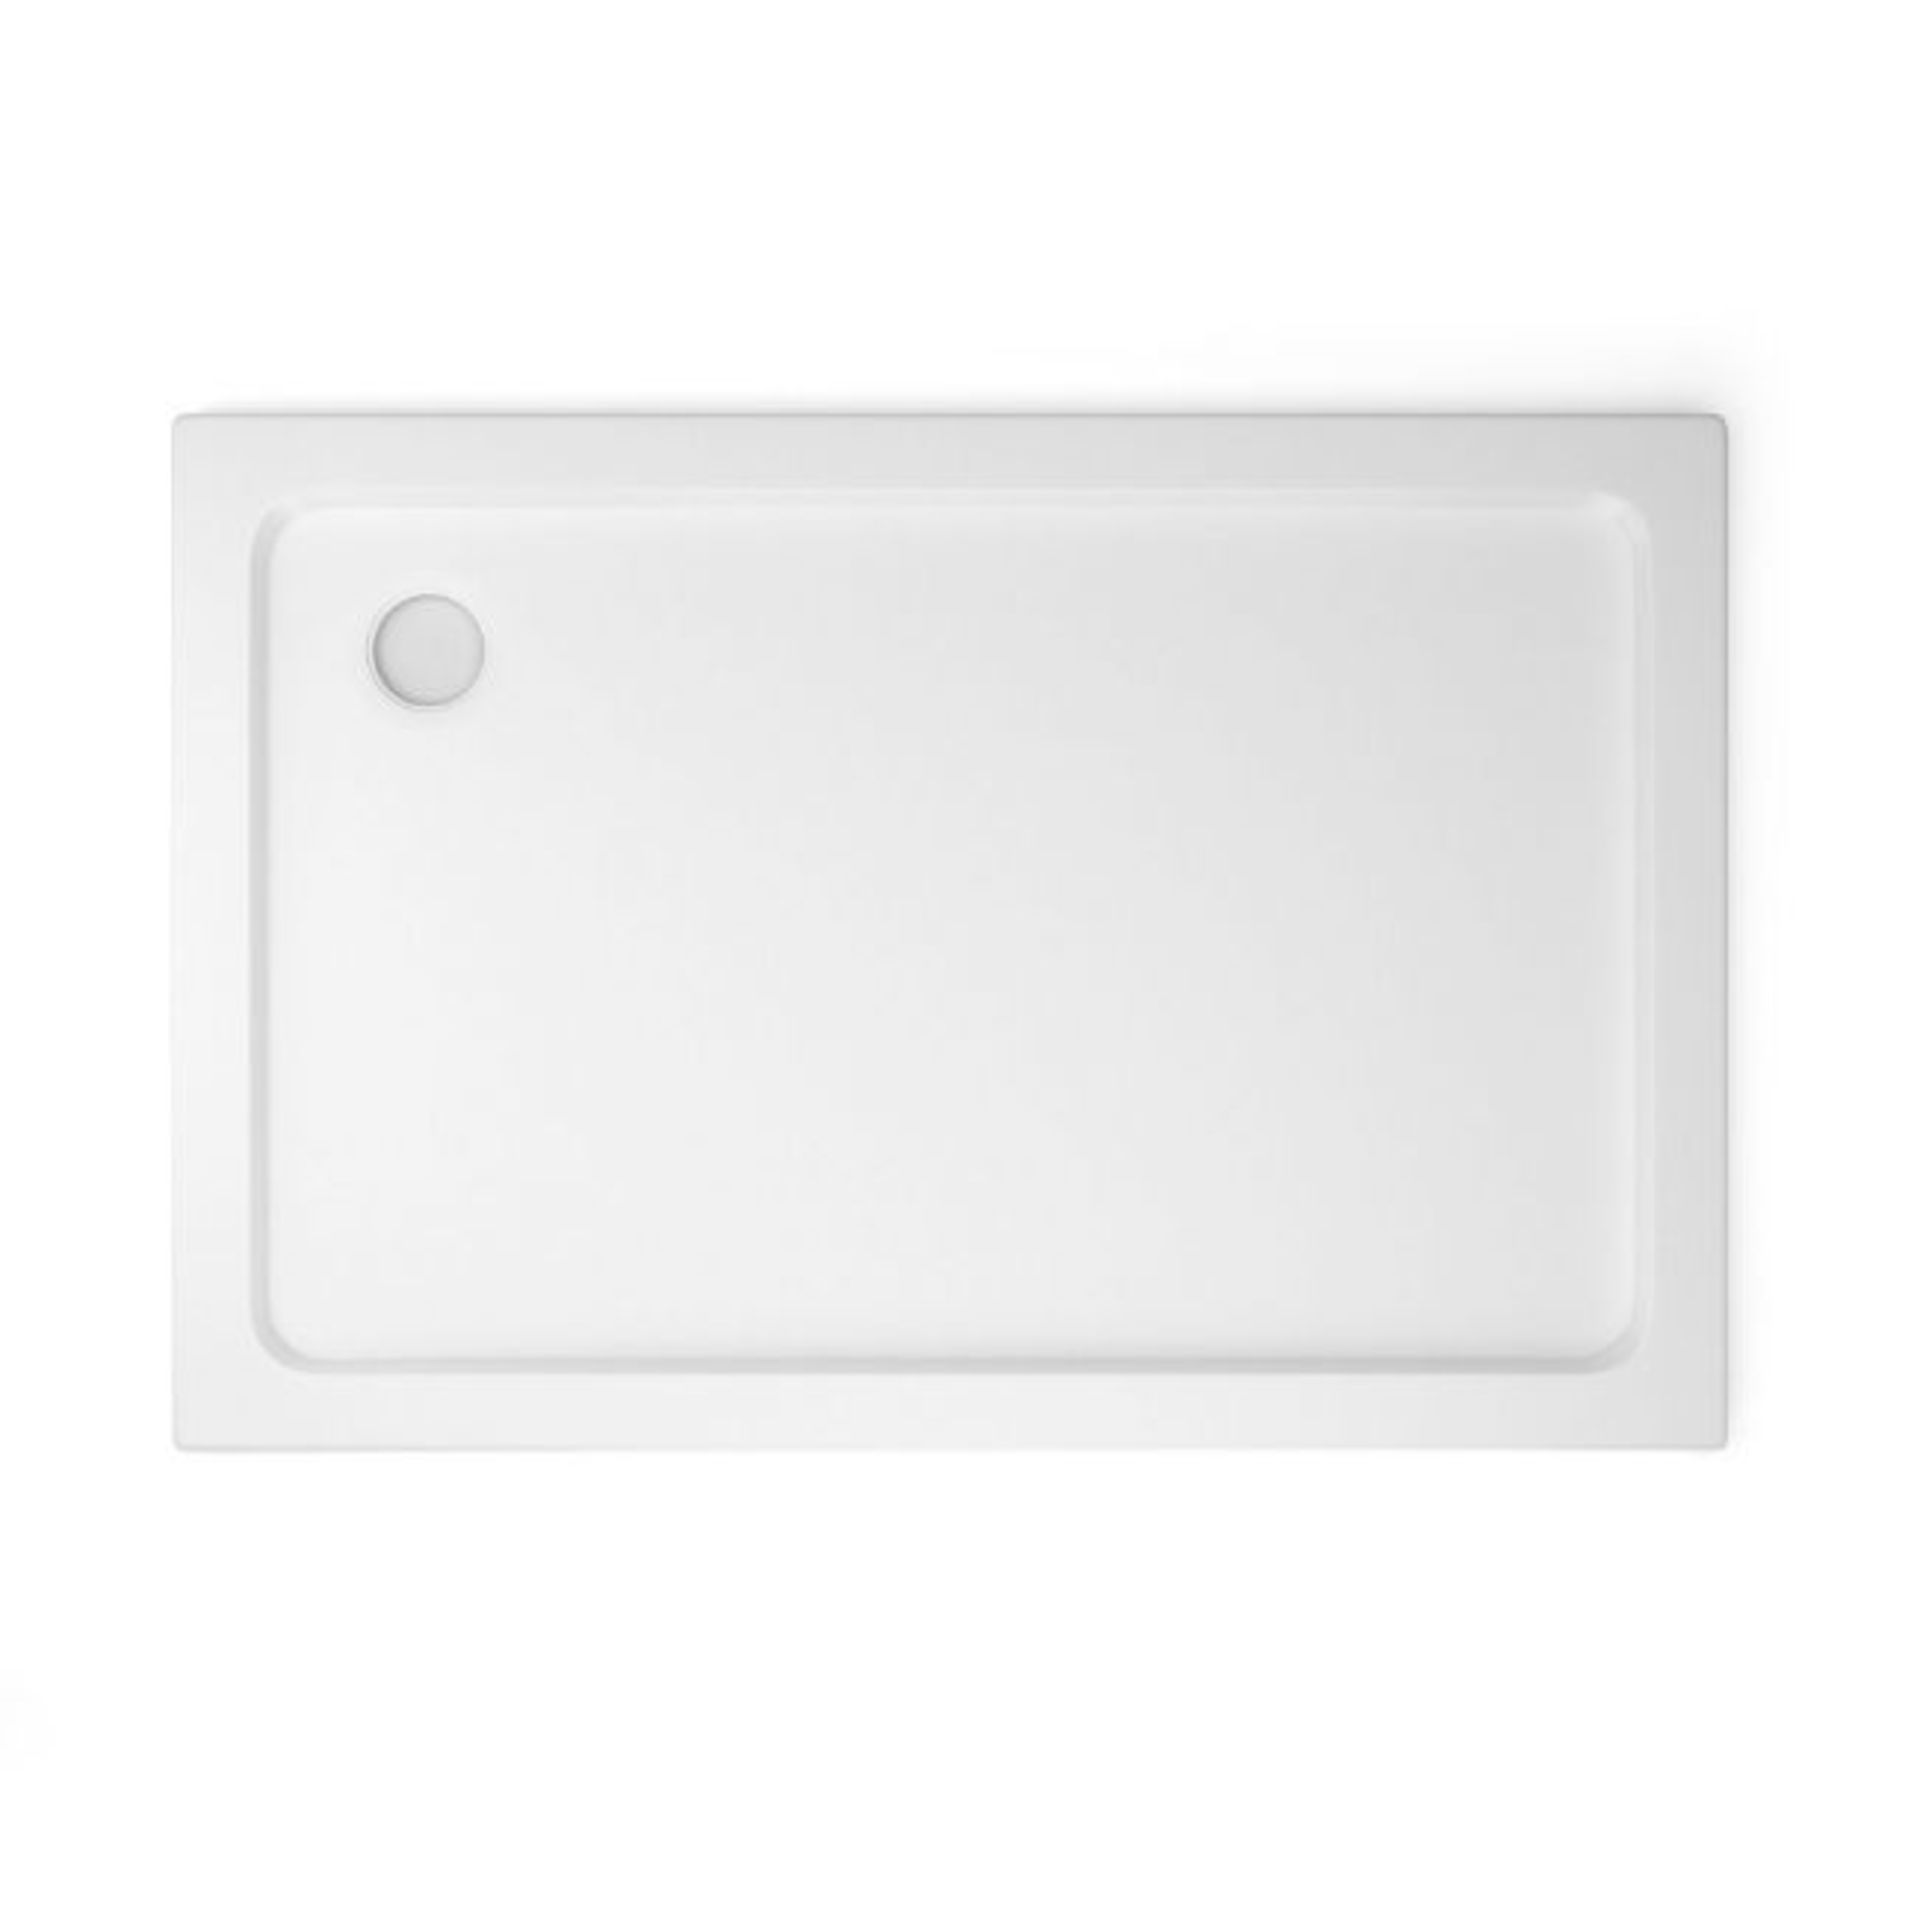 New 1200x800mm Rectangular Ultra Slim Shower Tray. RRP £349.99.Constructed From Acrylic Cappe...